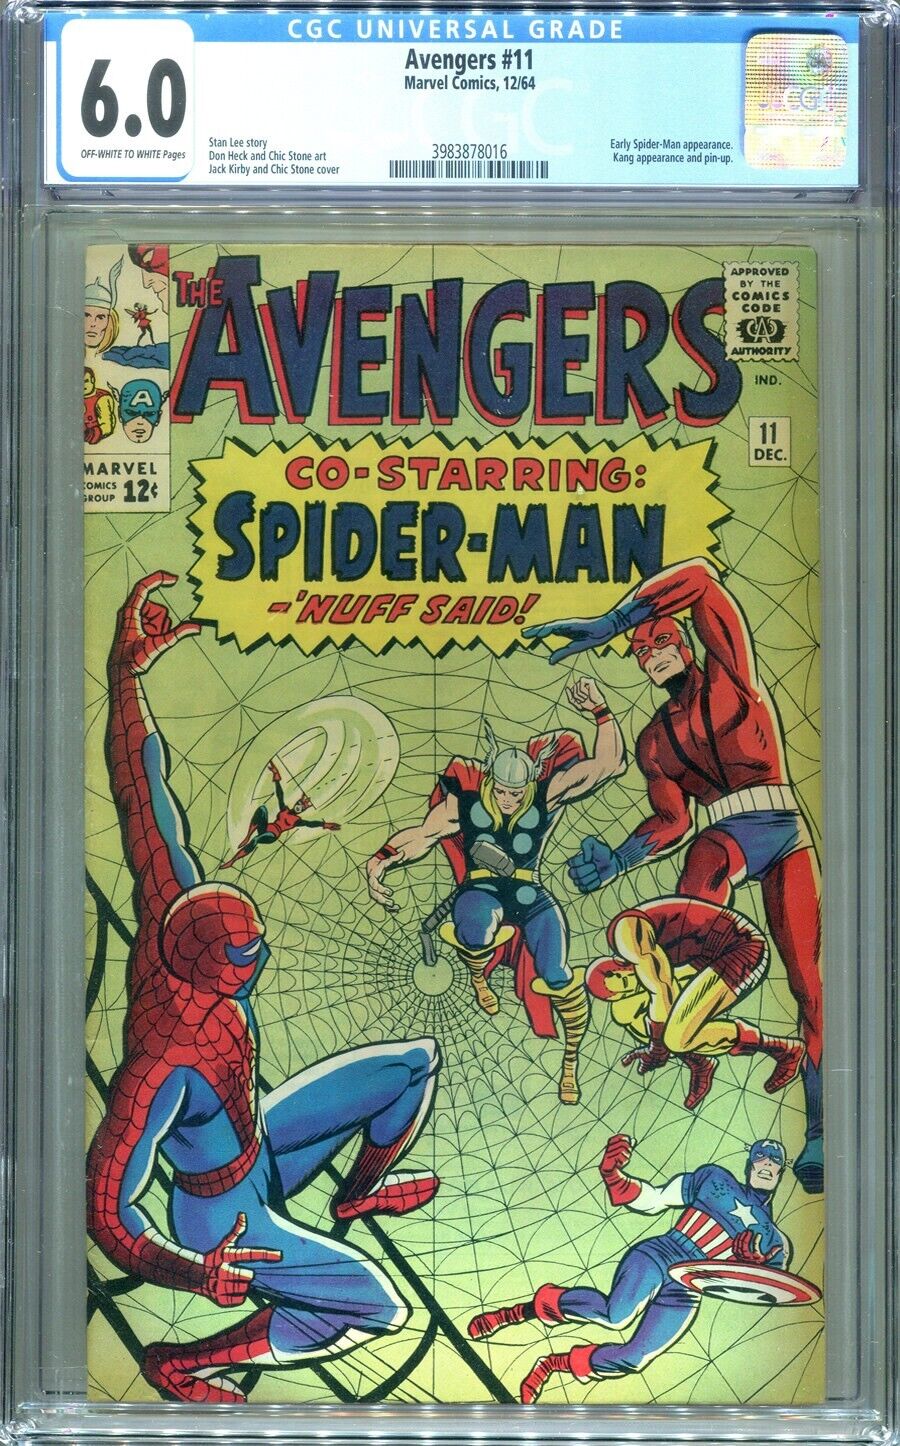 Avengers 11 ☀️ CGC 6.0 ☀️ 2nd appearance Kang ☀️ 1st Spider-Man crossover☀️ 1964